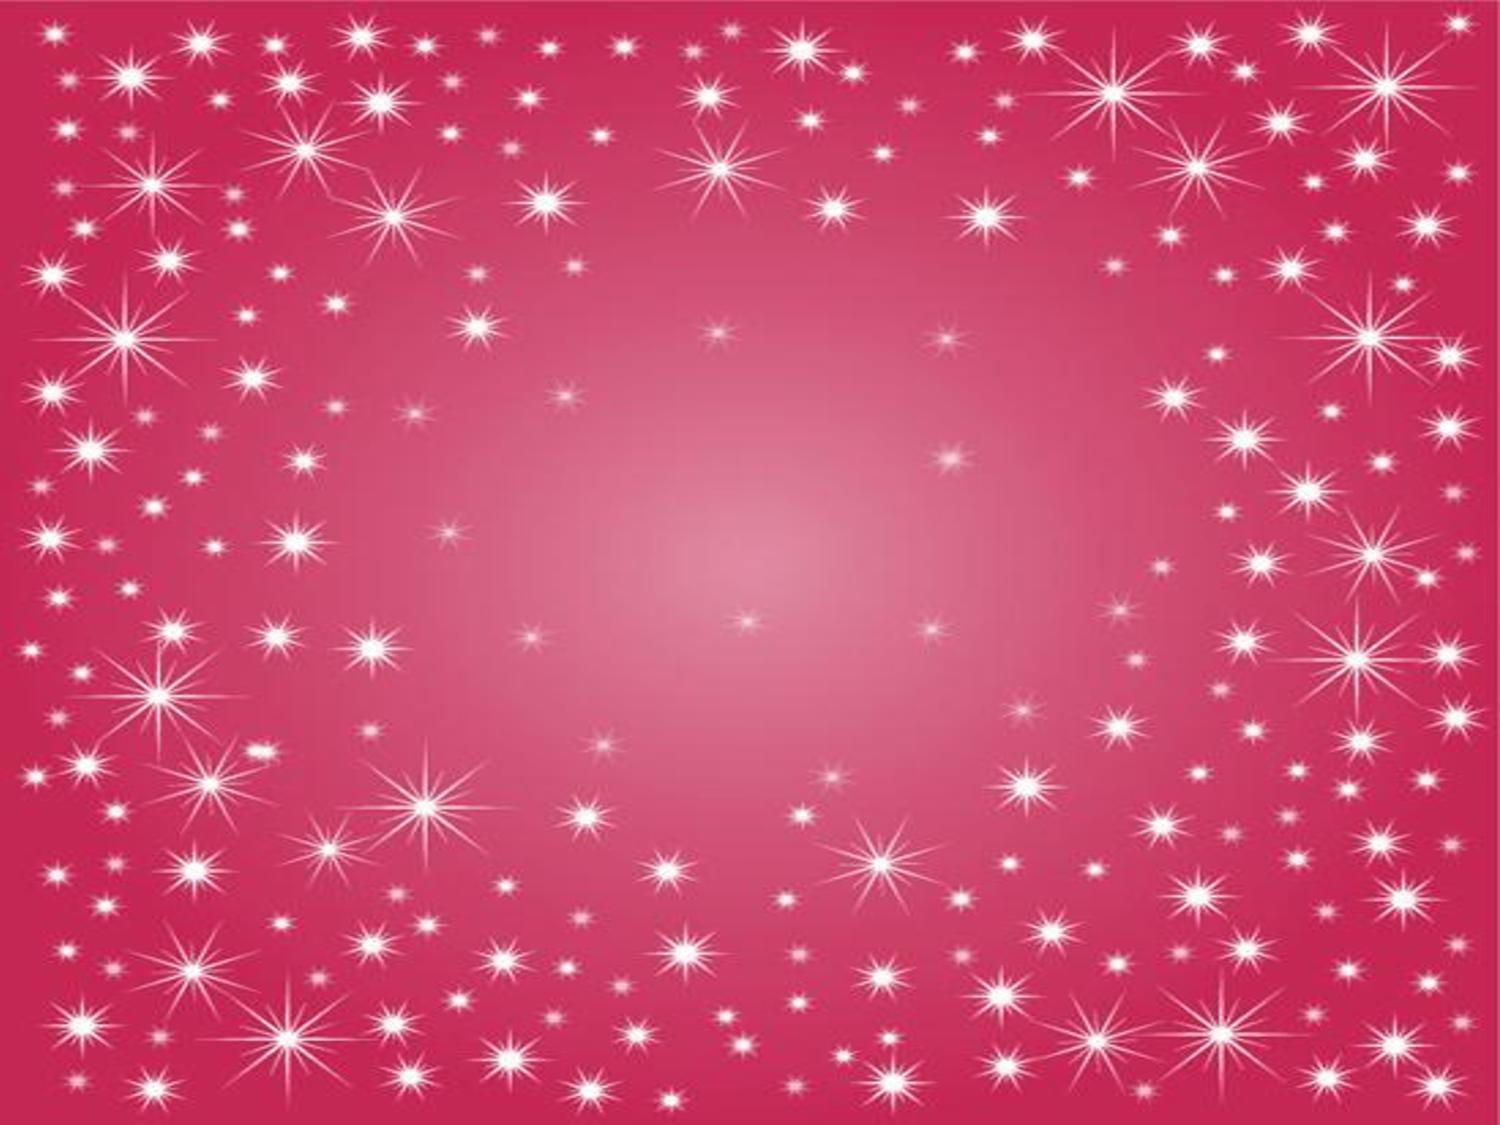 Wallpapers For Pretty Pink Sparkly Backgrounds | HD Wallpapers Range